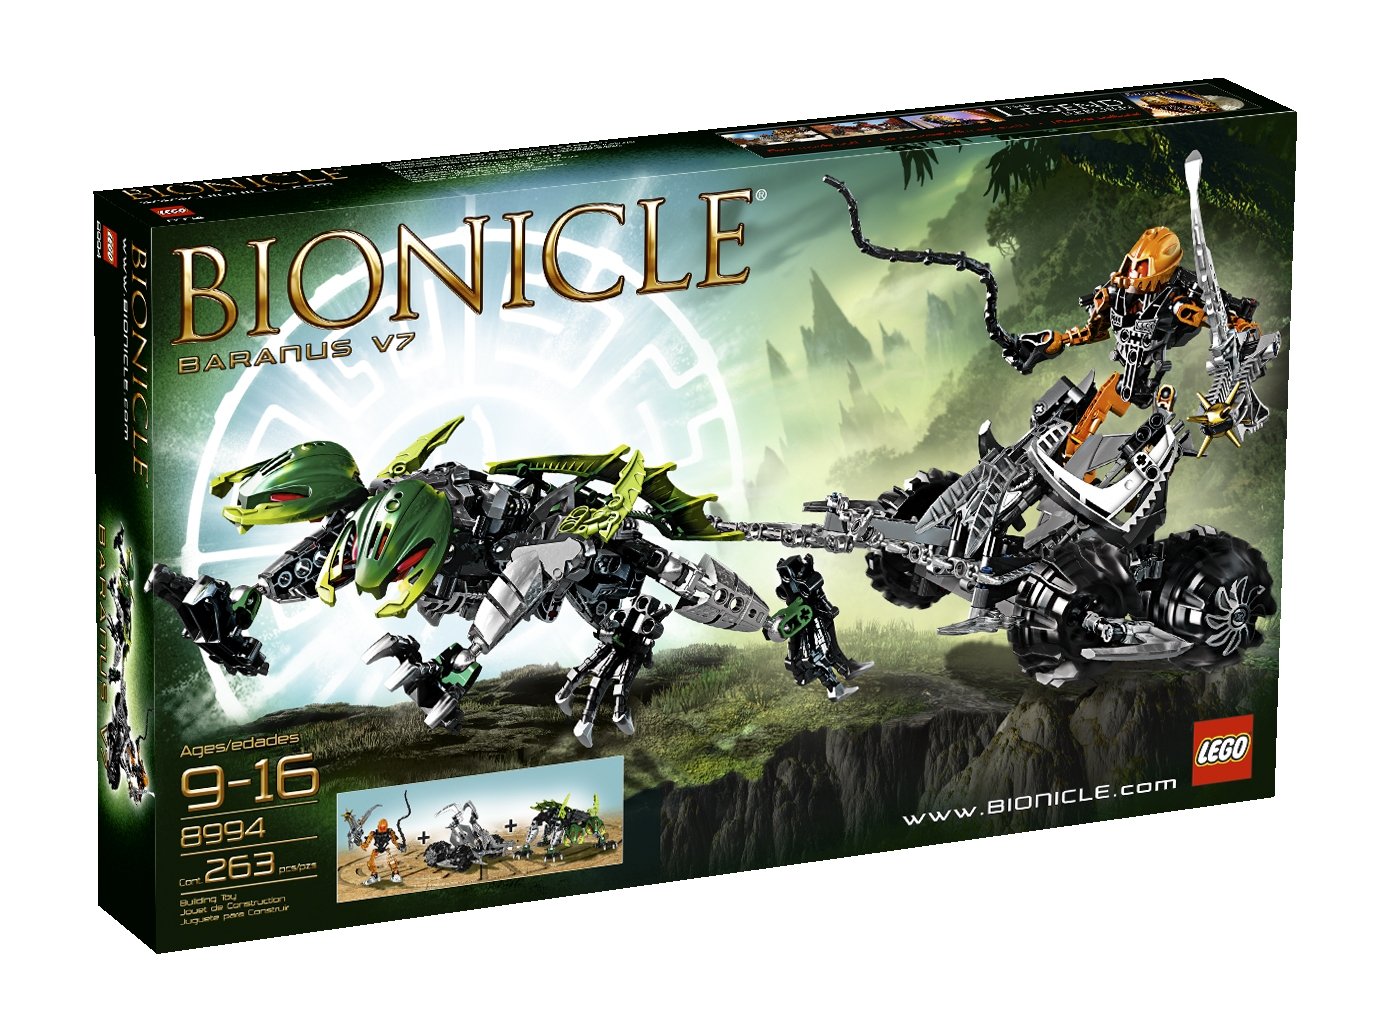 15 Best Lego BIONICLE Sets 2023 - Buying Guide & Reviews 10